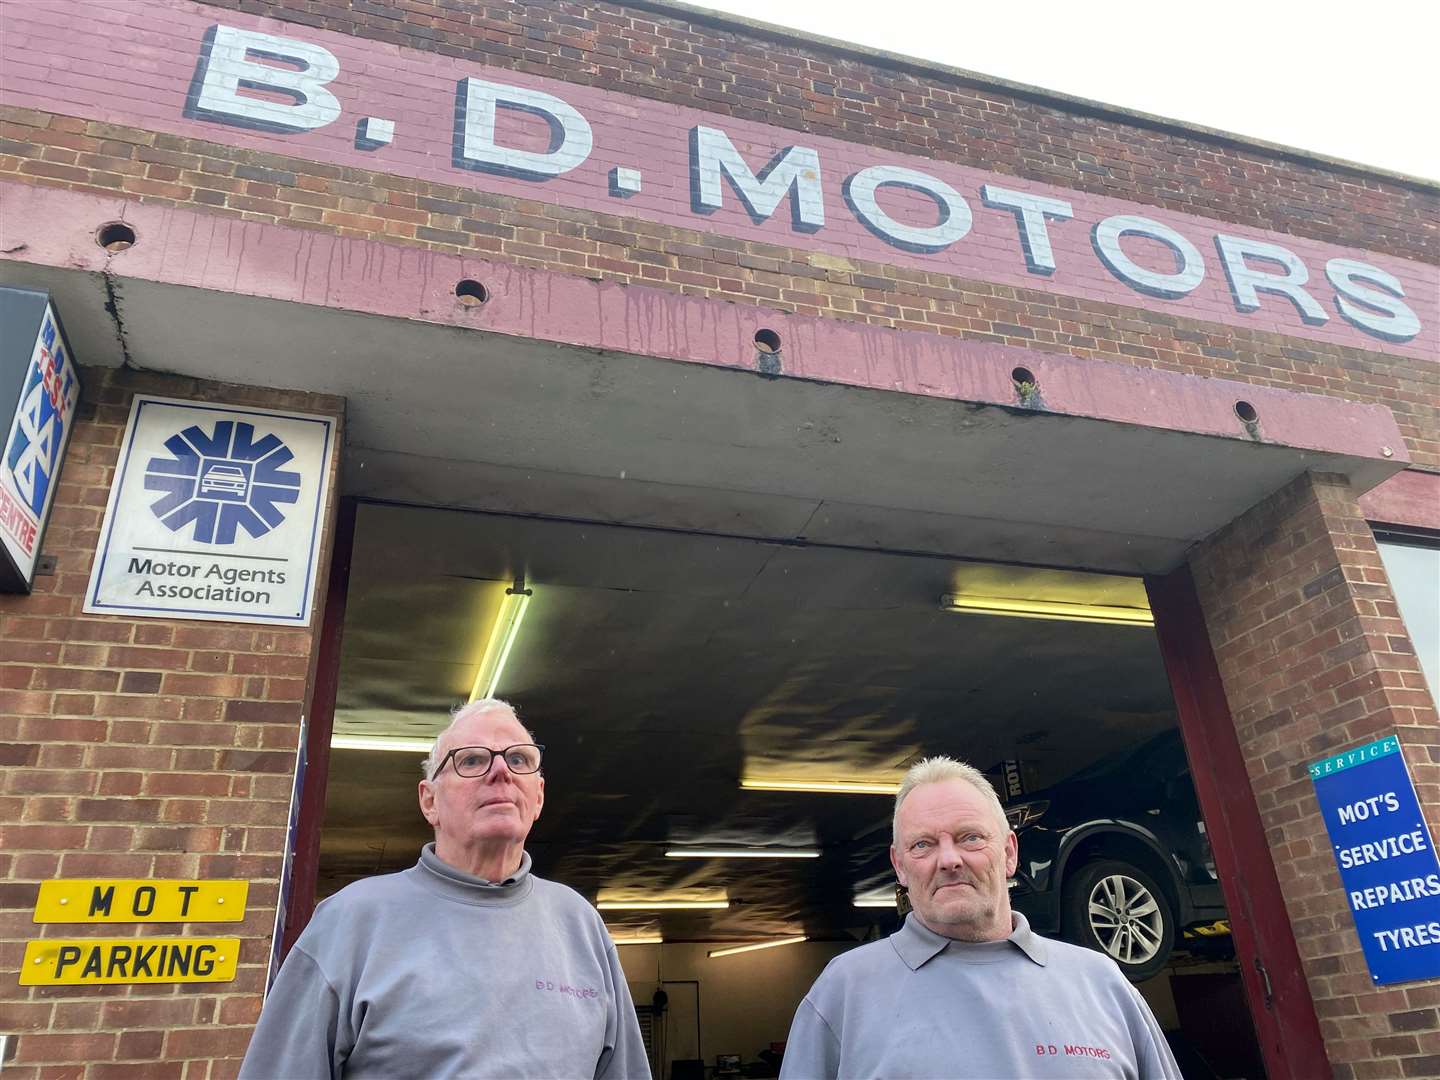 Alf Reed has run B D Motors since it started, while Adrian Shoosmith joined 40 years ago